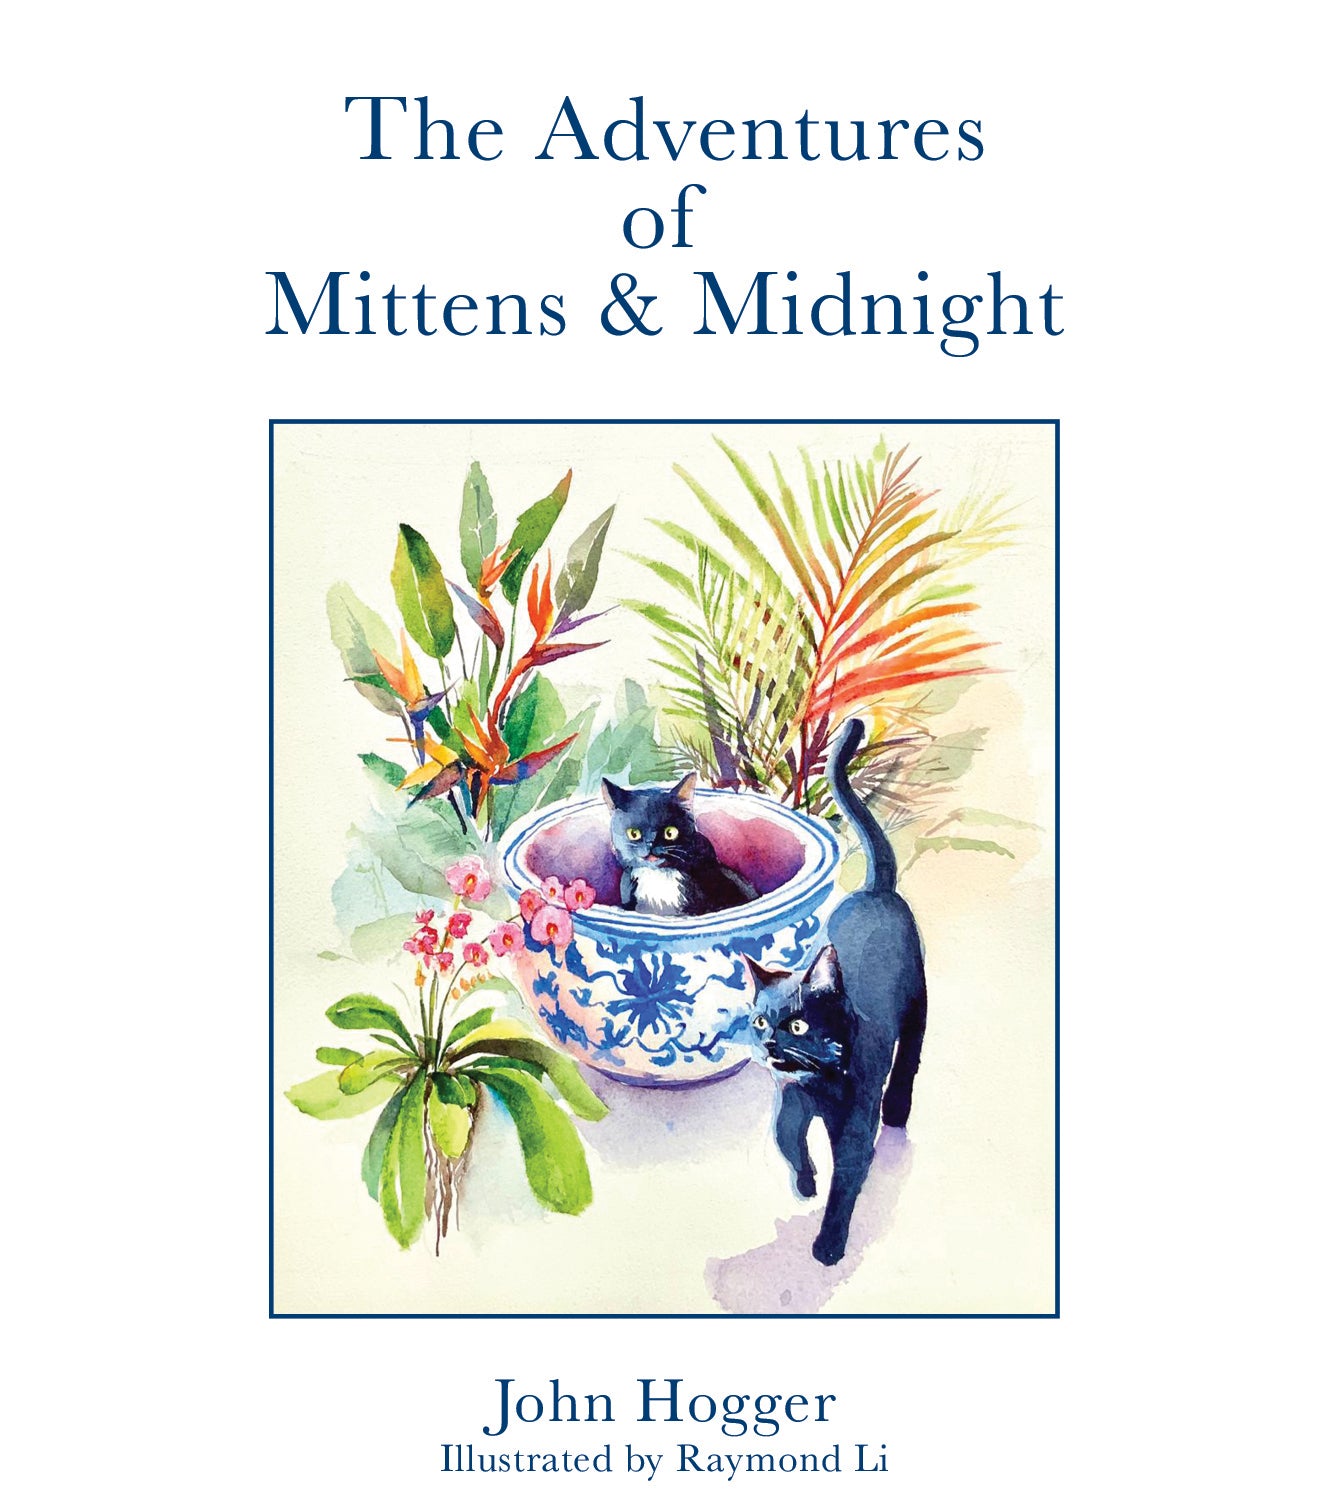 The Adventures of Mittens & Midnight